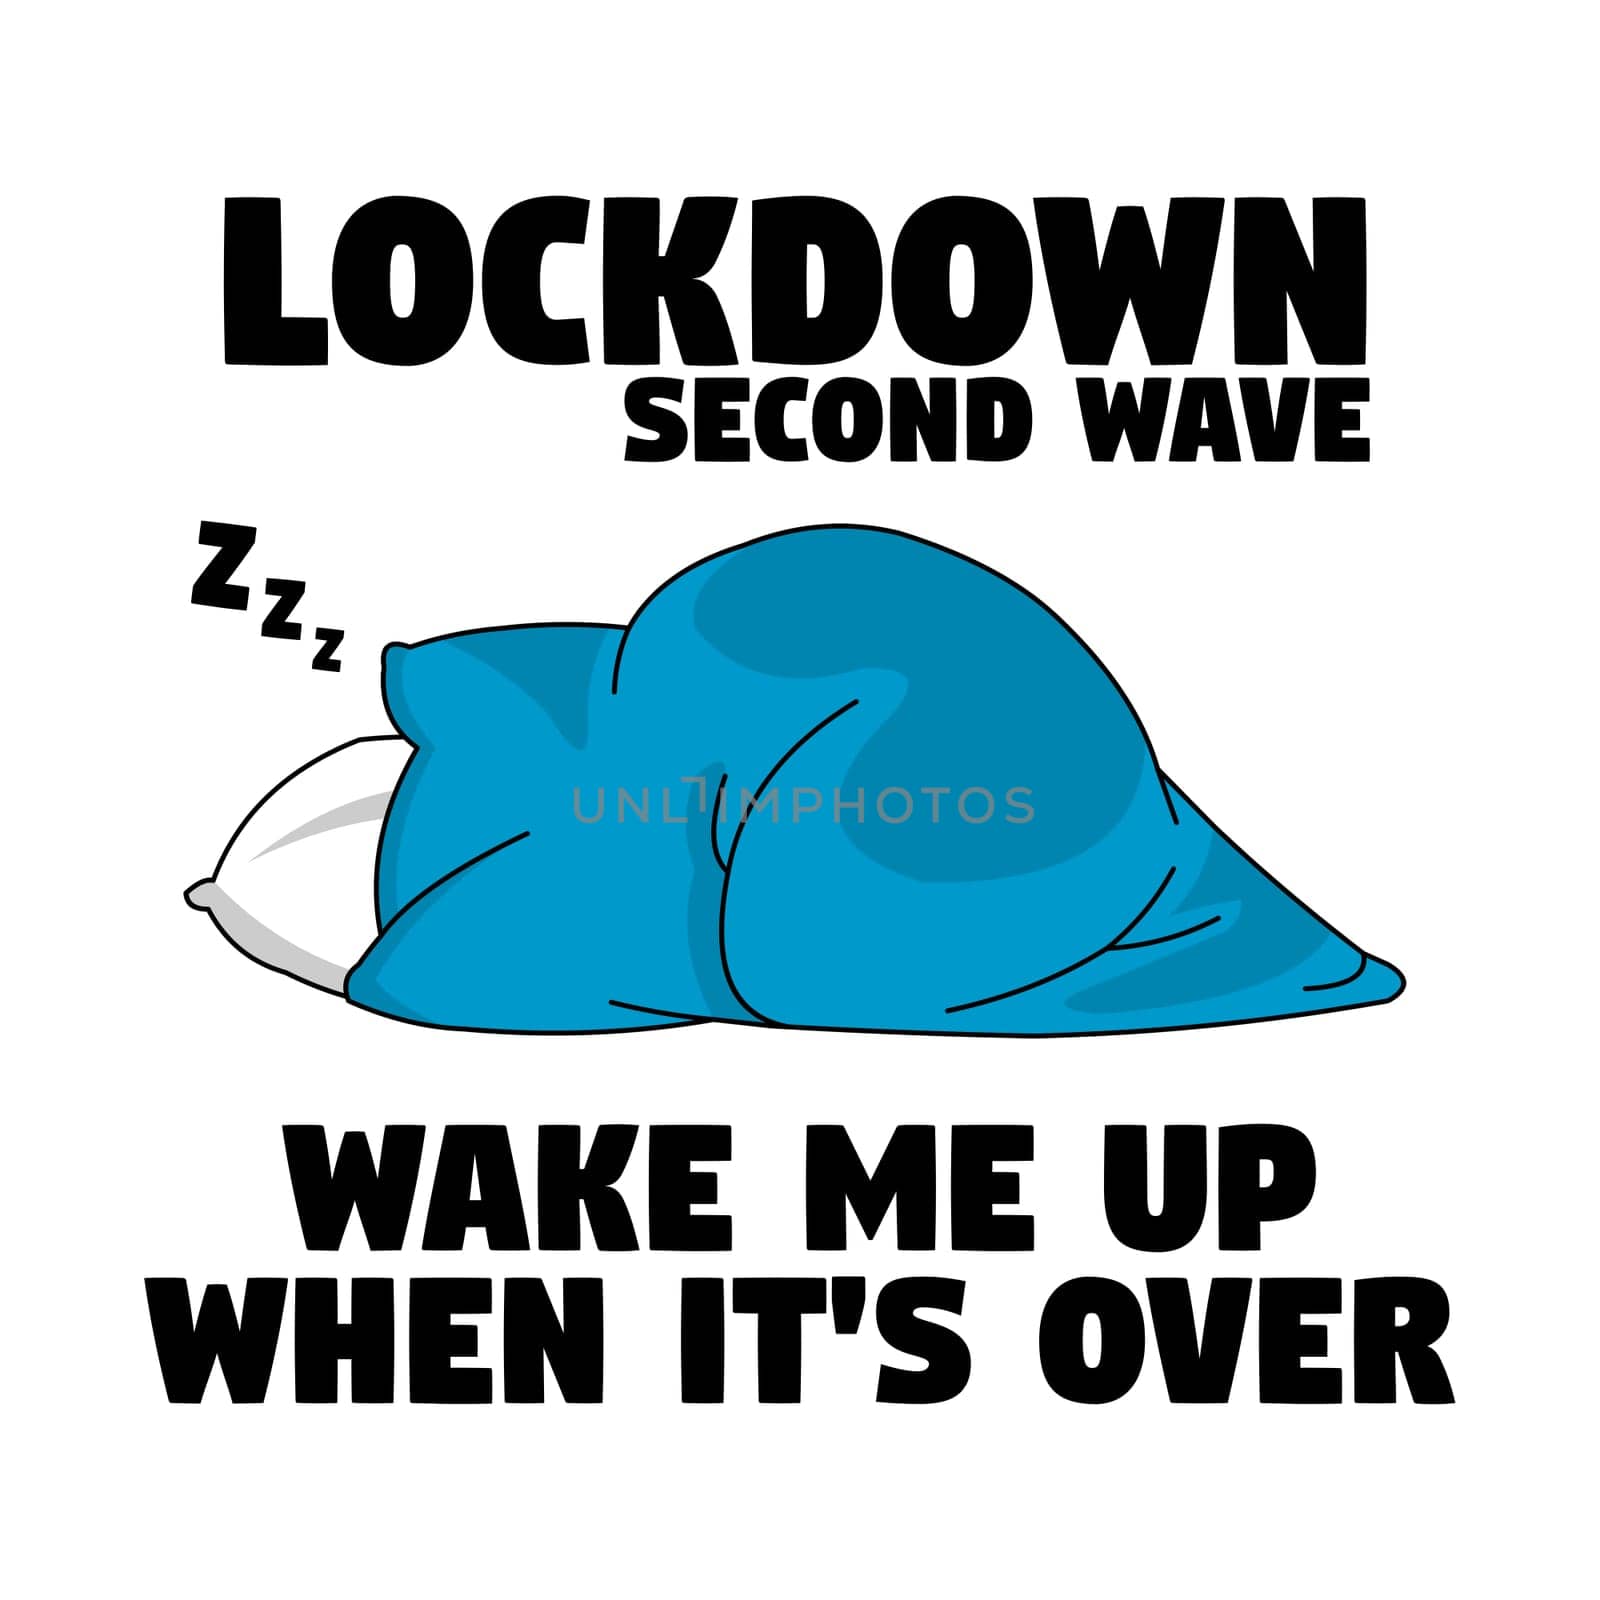 A person under the blanket wrapped up with the text "Lockdown second wave, wake me up when its over".